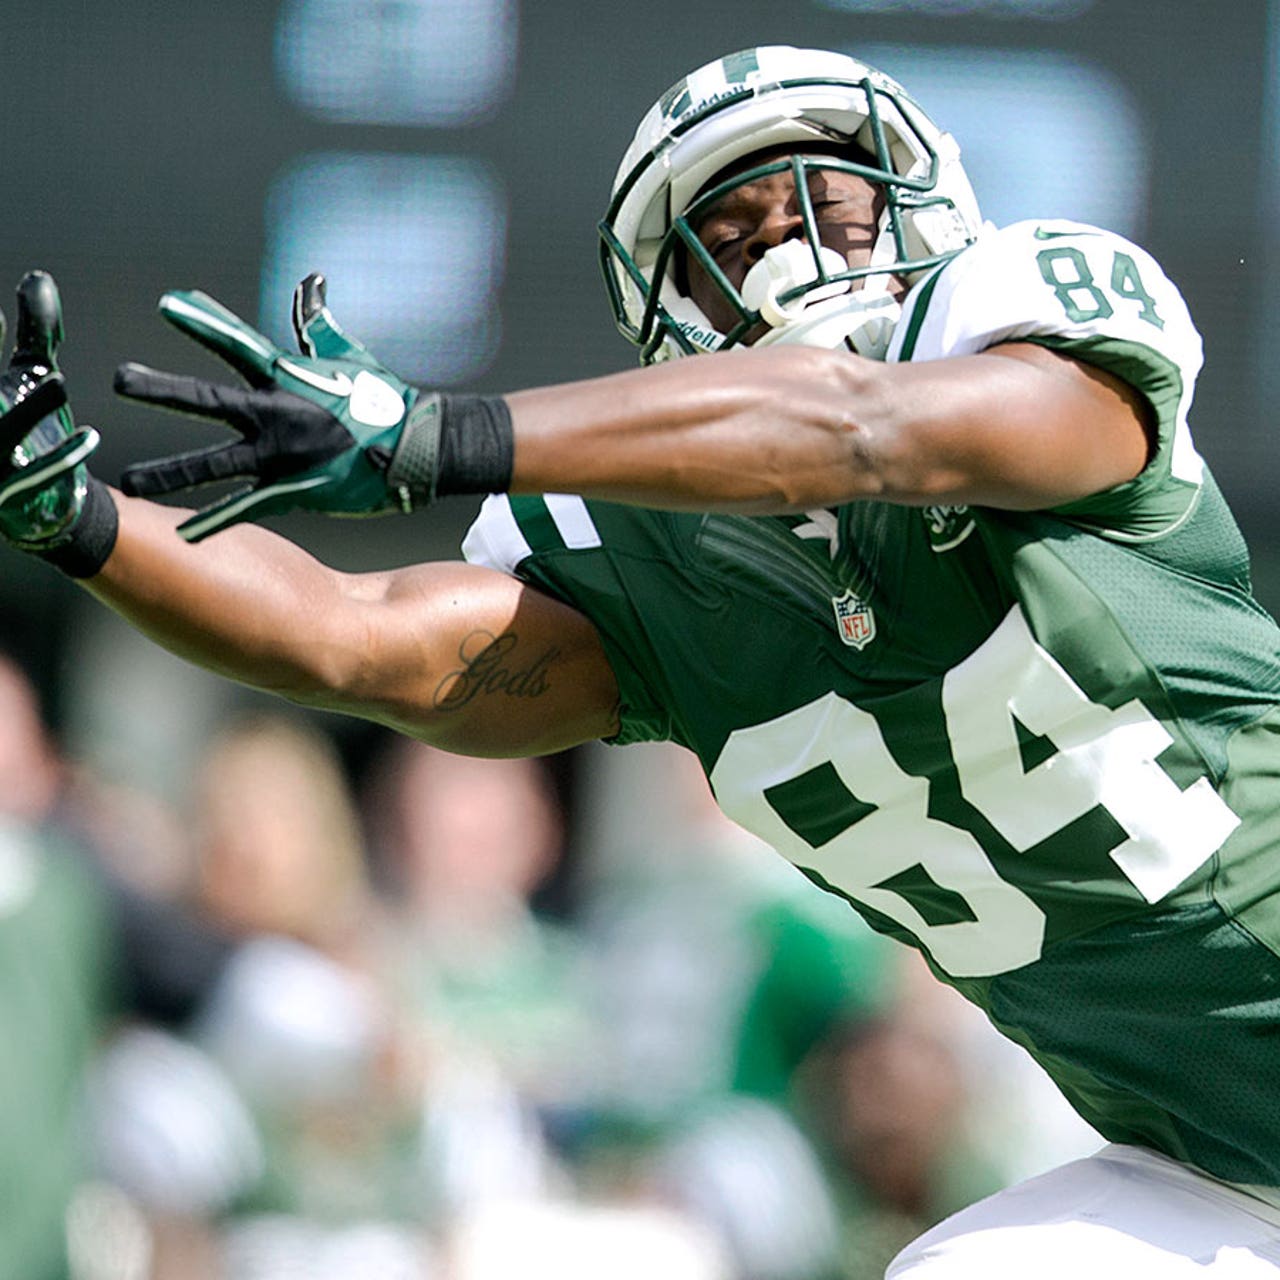 Wide receiver Stephen Hill among Jets&#39; final roster cuts | FOX Sports